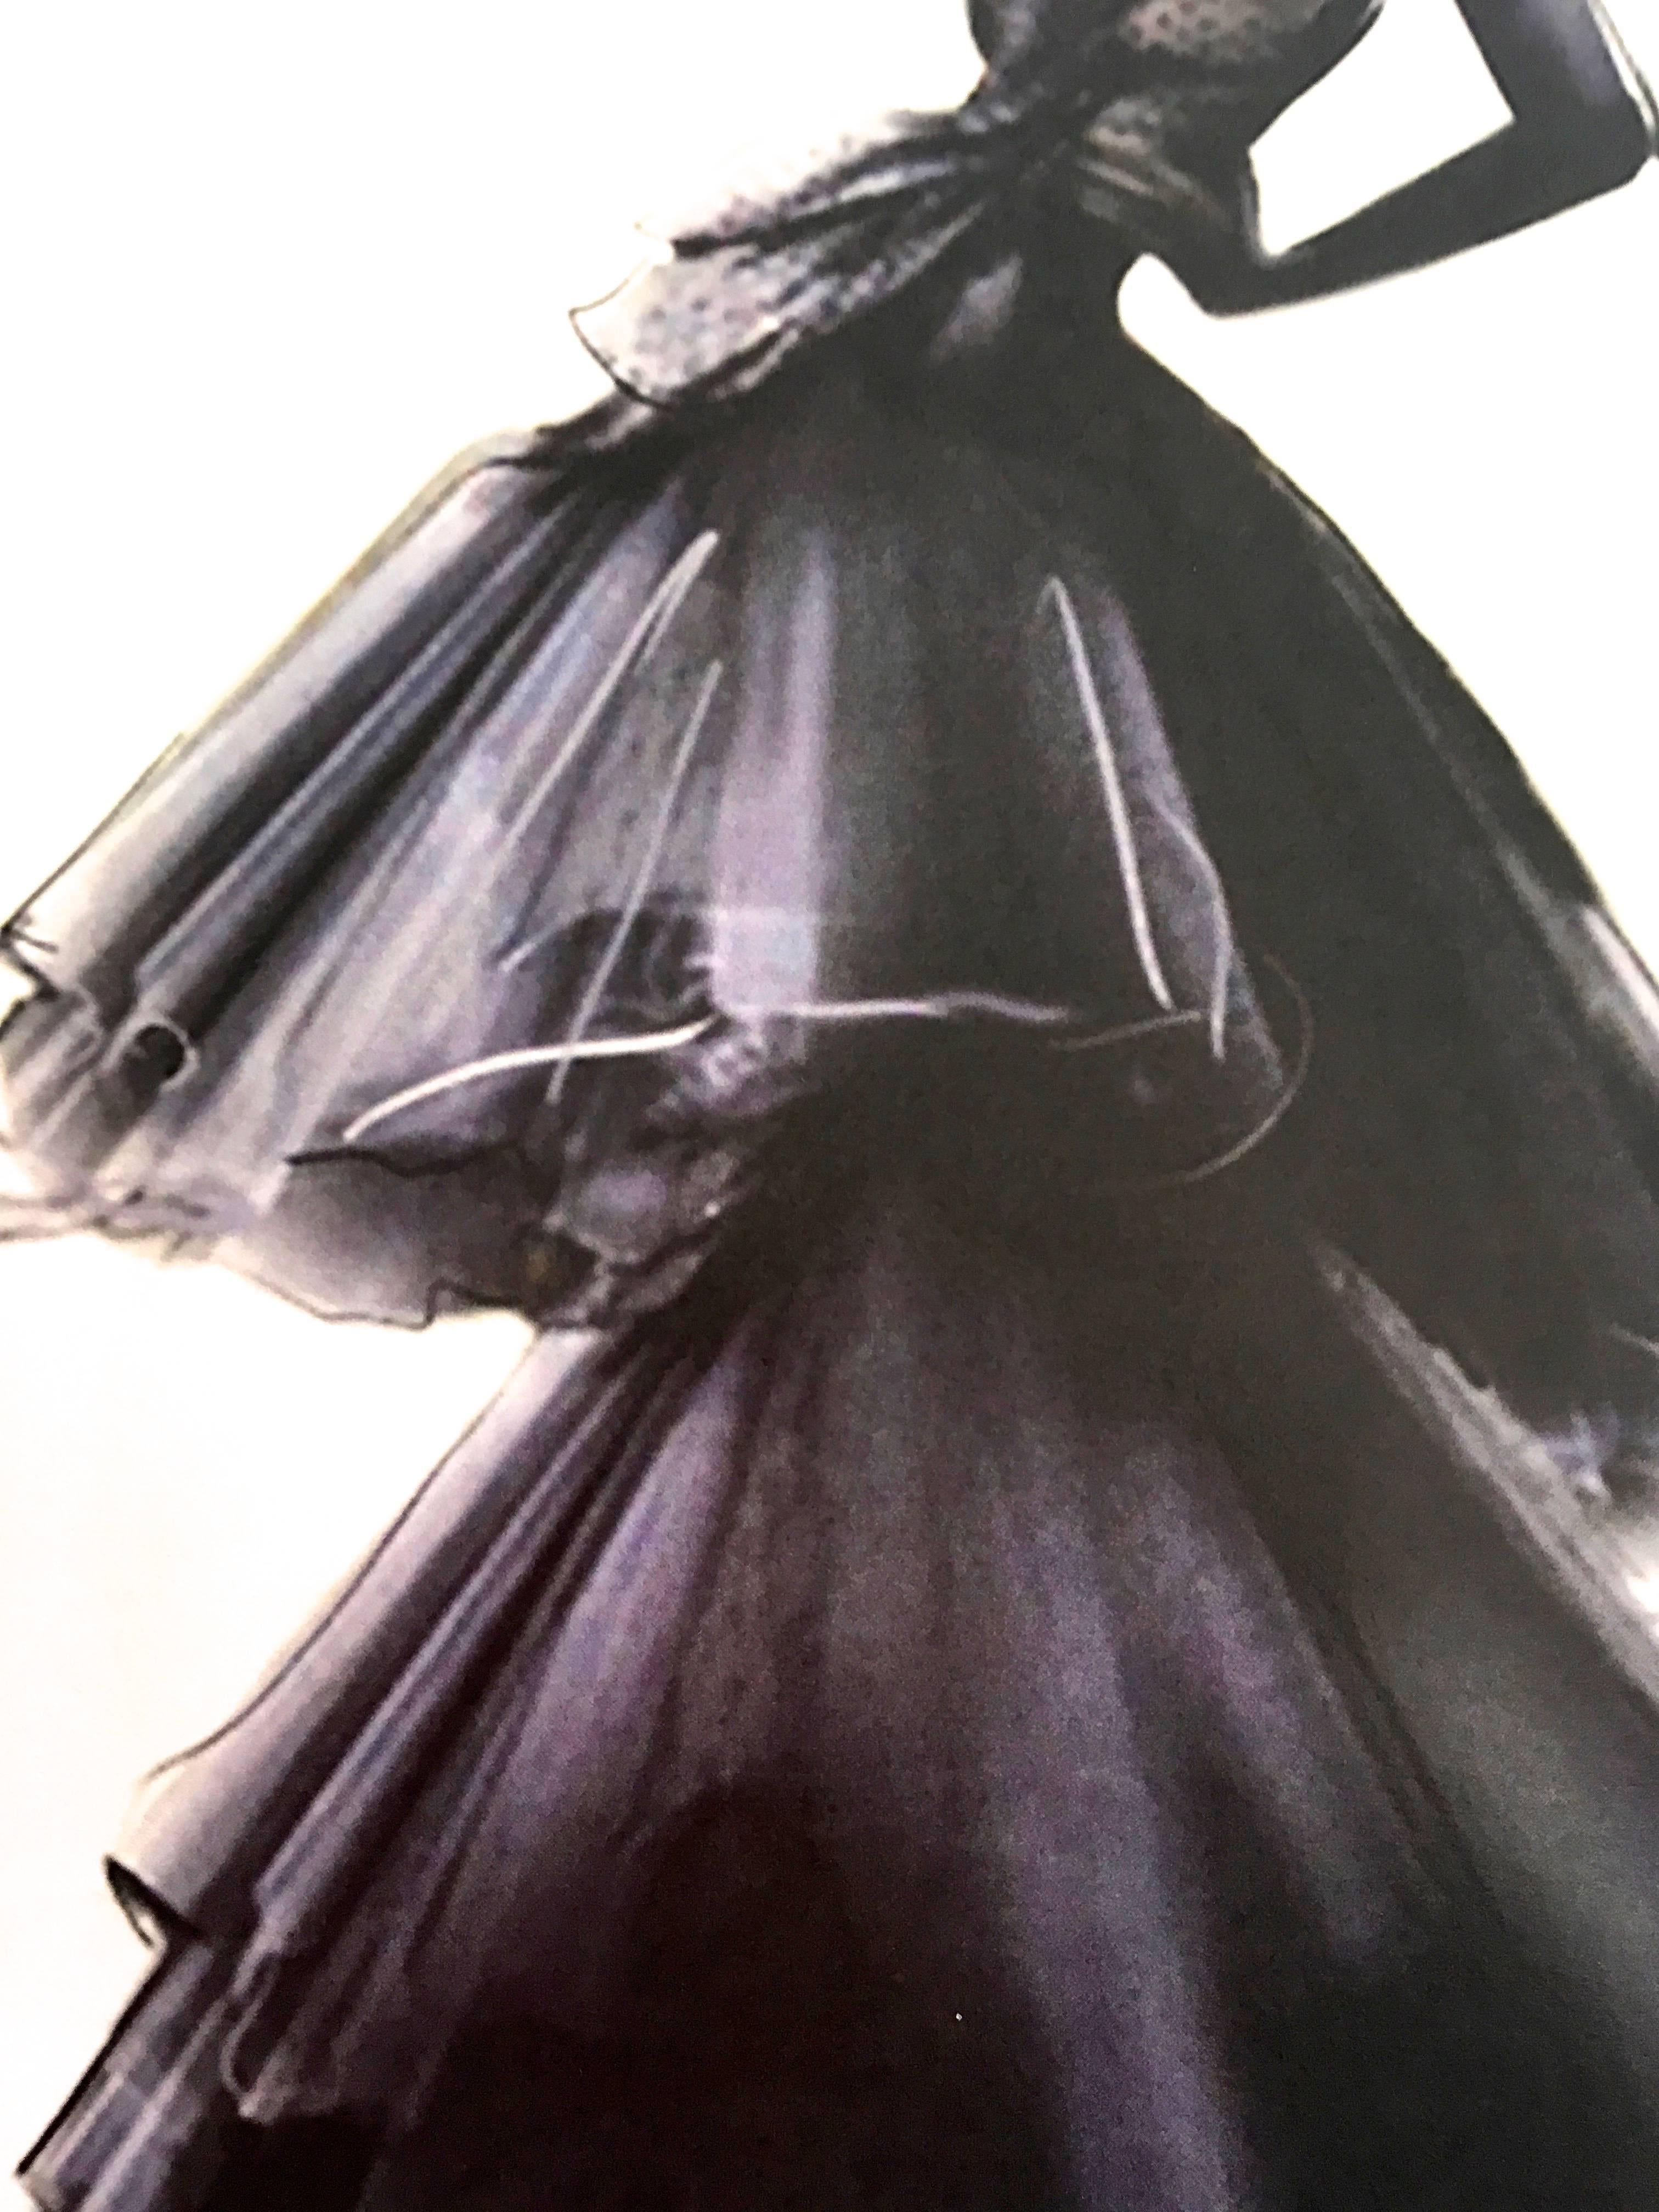 Christian Dior Vintage Ad Print In Excellent Condition For Sale In Boca Raton, FL